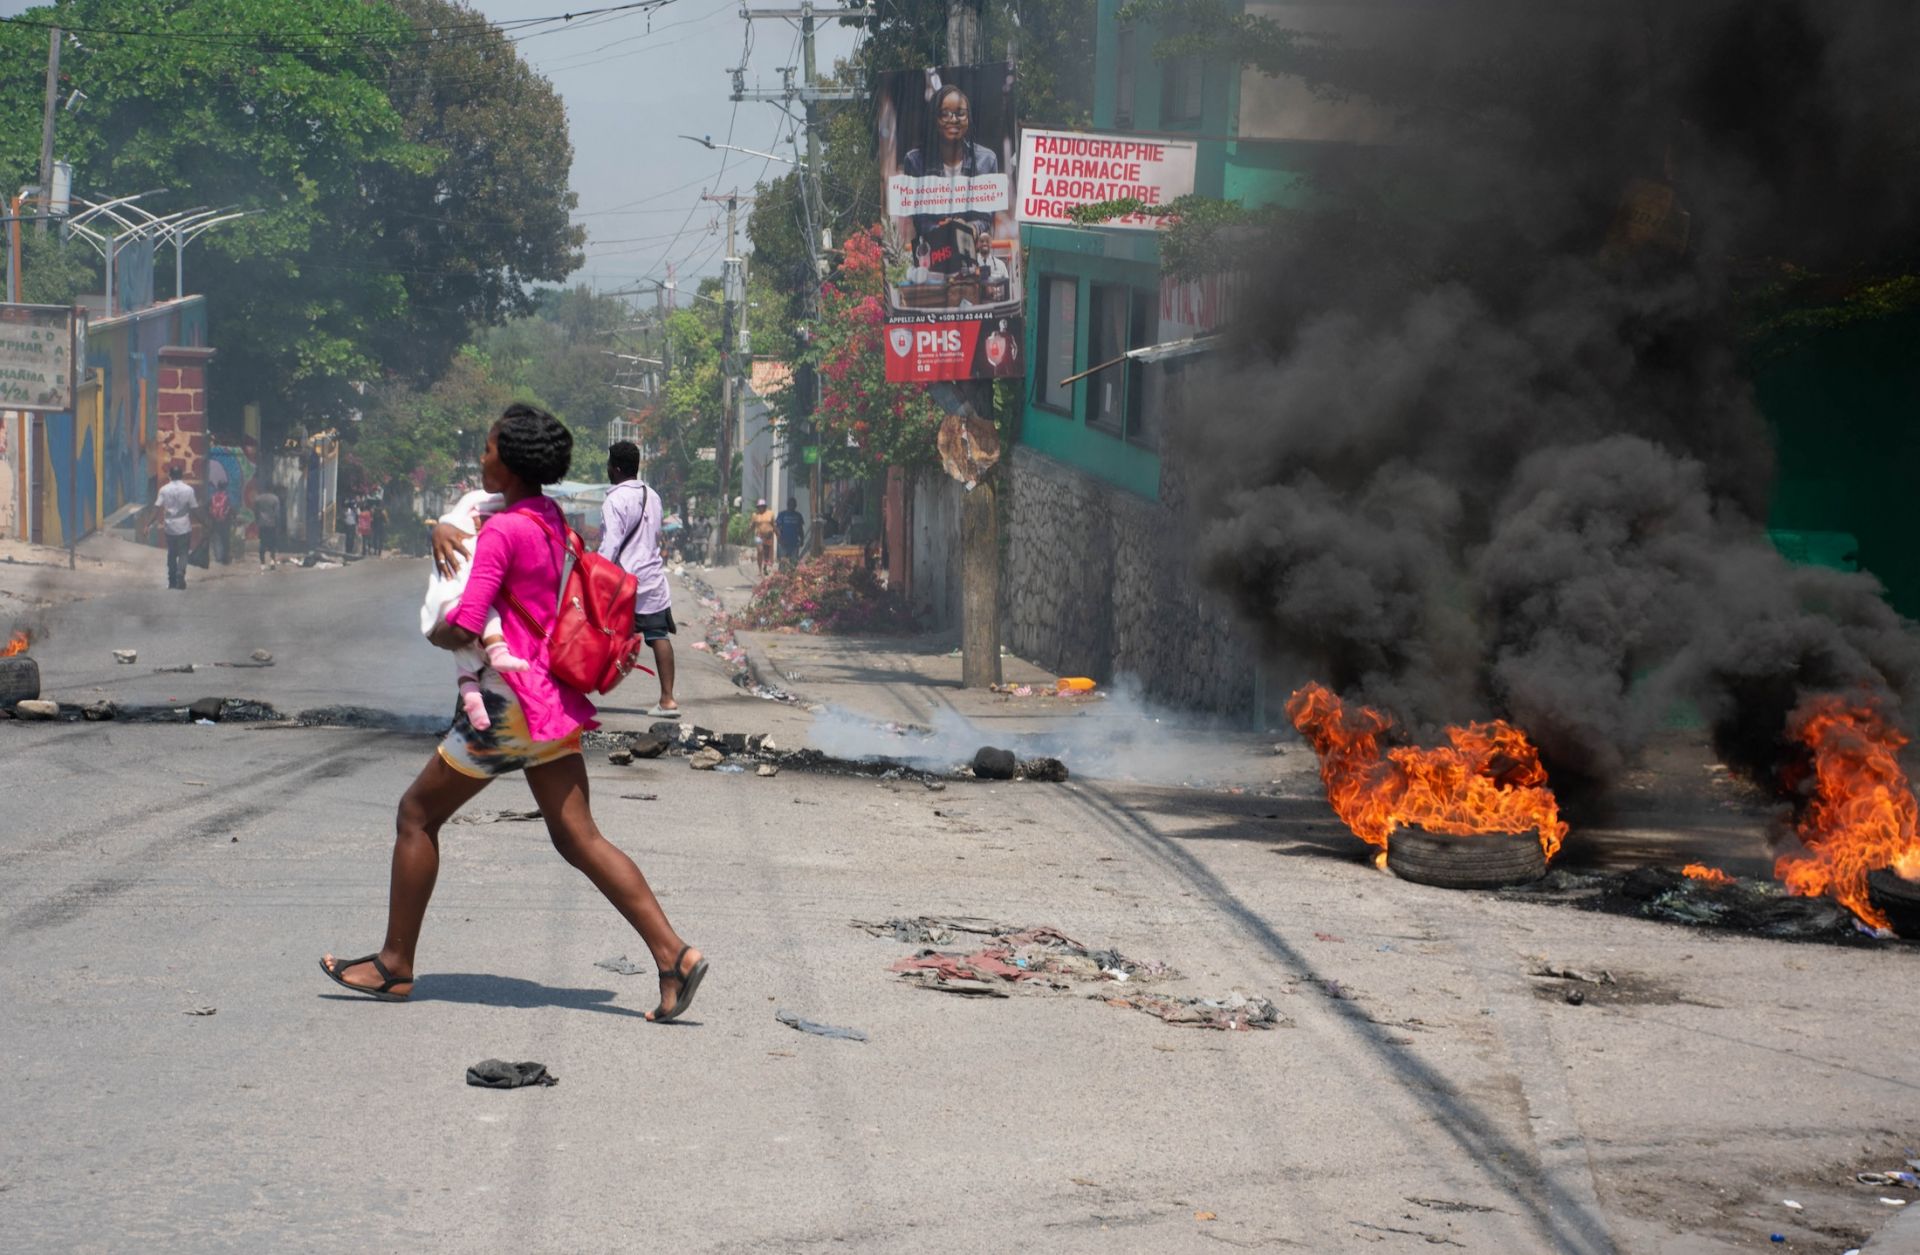 A woman carrying a child runs from an area in Port-au-Prince, Haiti, after hearing gunshots on March 20, 2024.